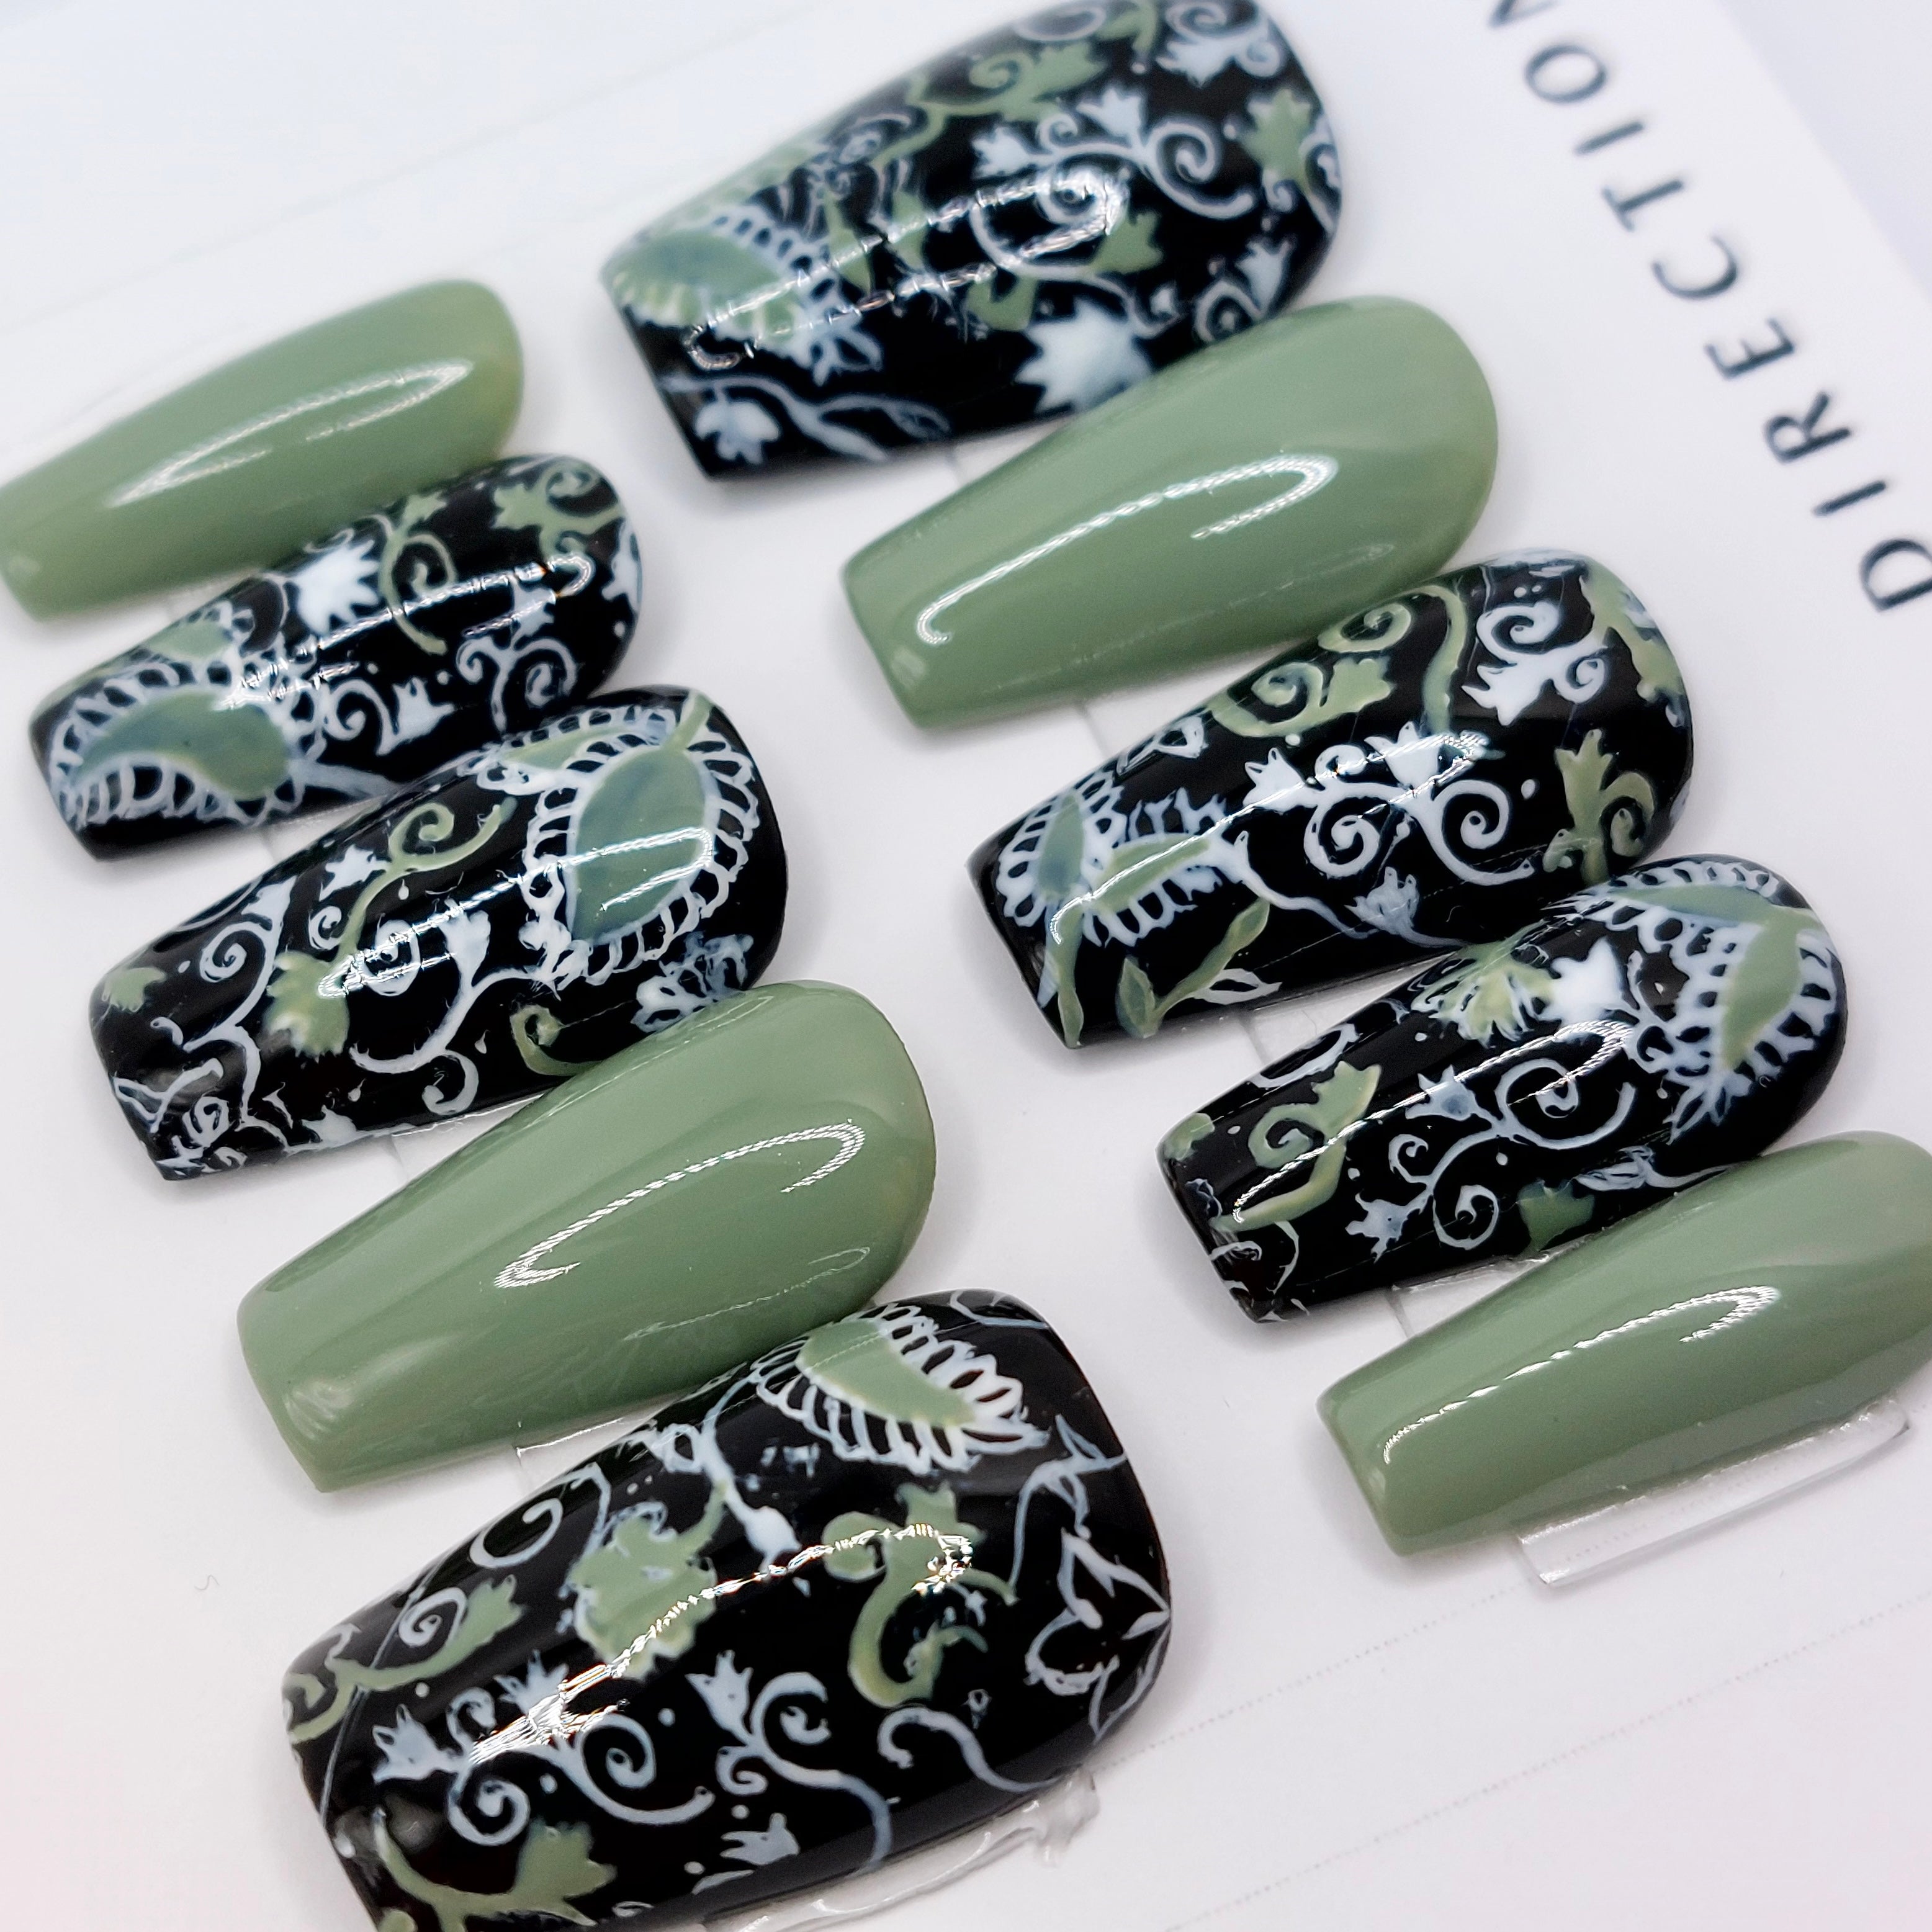 Custom press on nails, fancyb nails with white and sage floral designs on black background on short coffin press on nails.